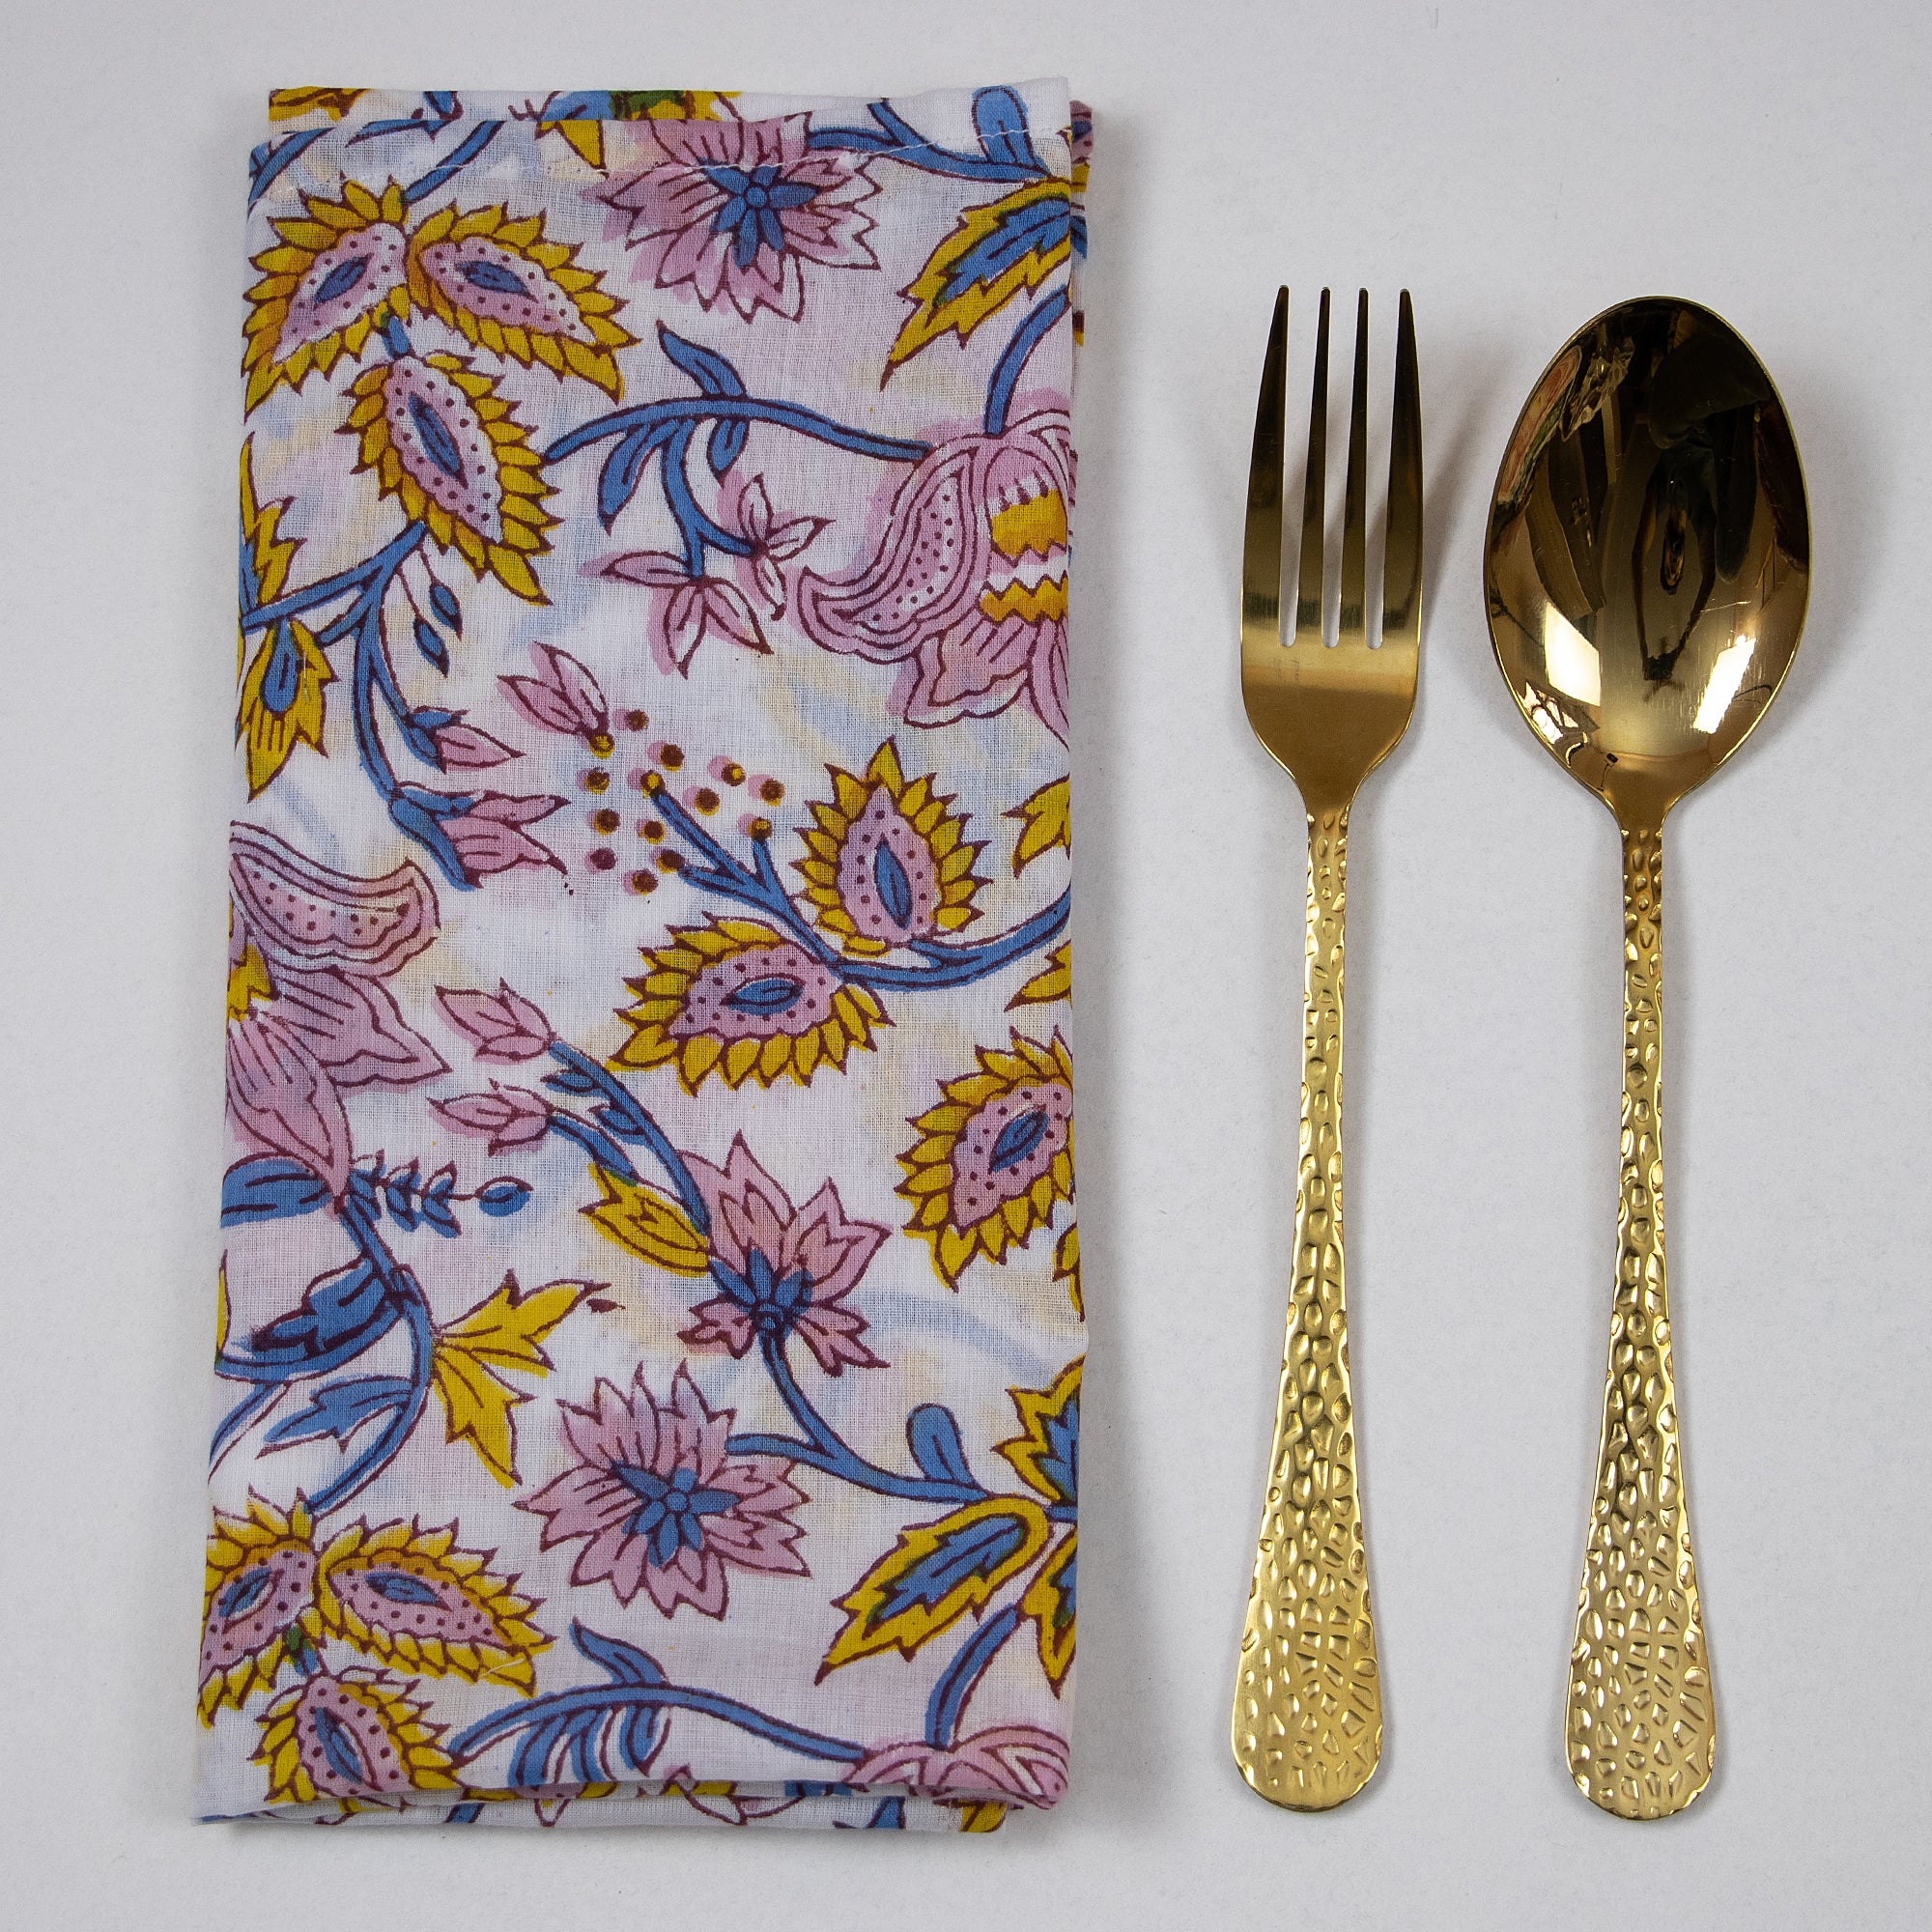 Floral Printed 100% Cotton Table Napkins